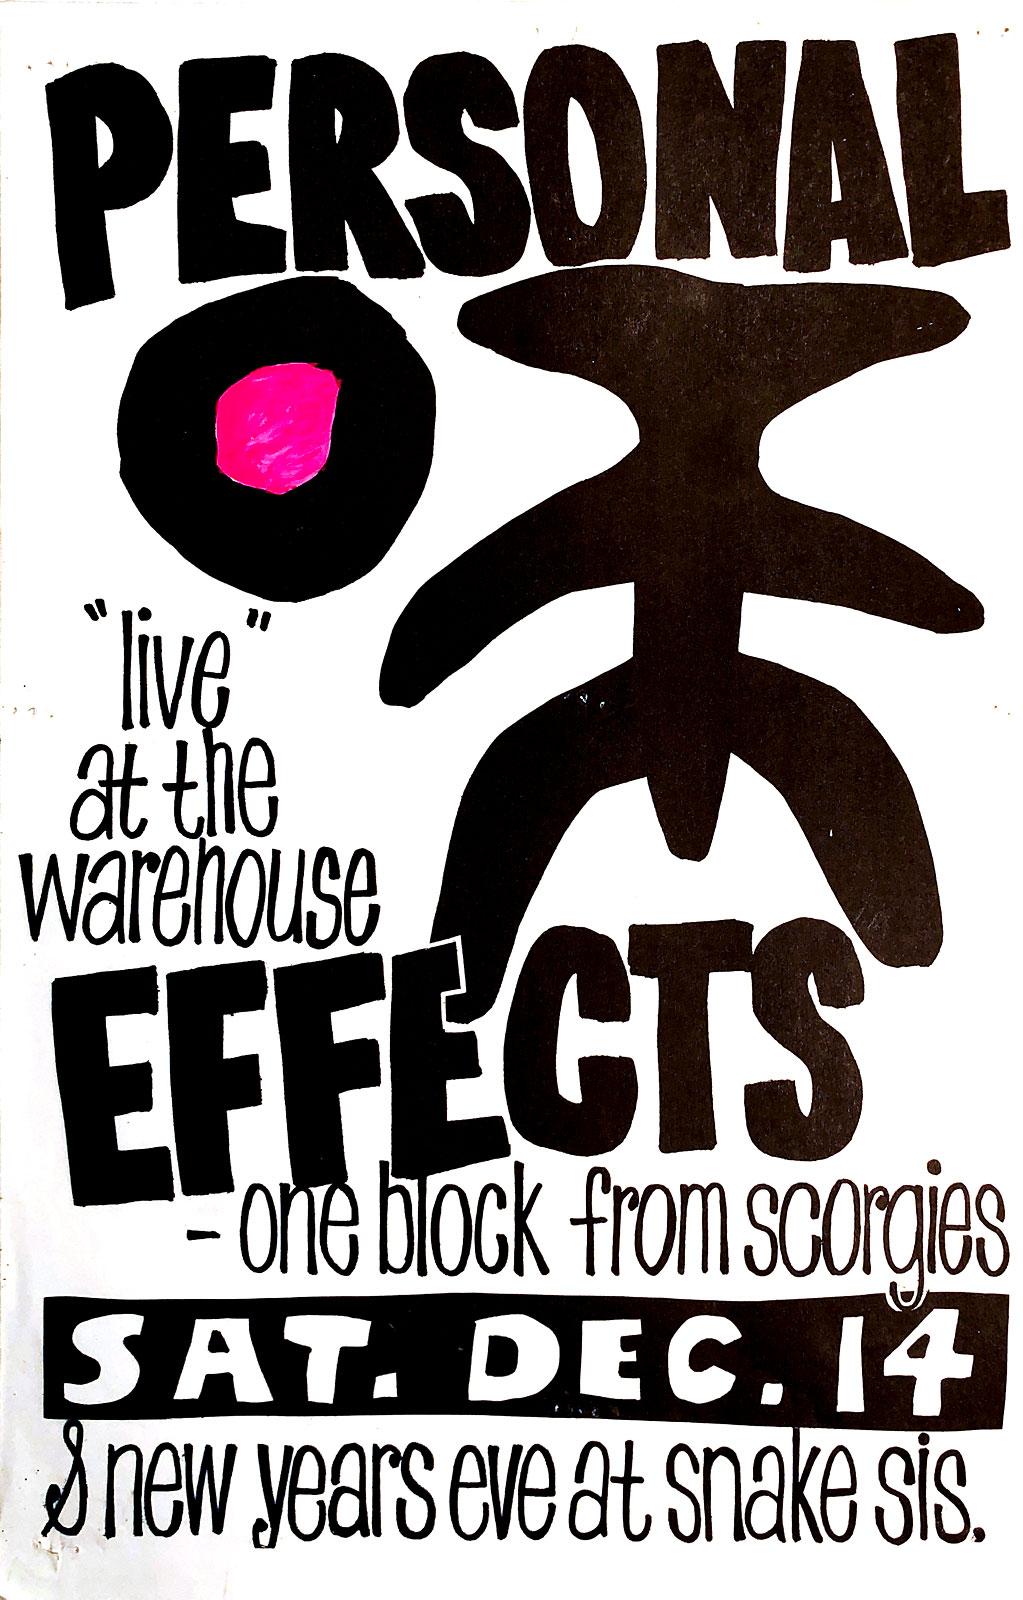 Poster for two Personal Effects gigs. The Warehouse in Rochester, New York on 12.14.1985 and Snakesister's Cafe on 12.31.986.